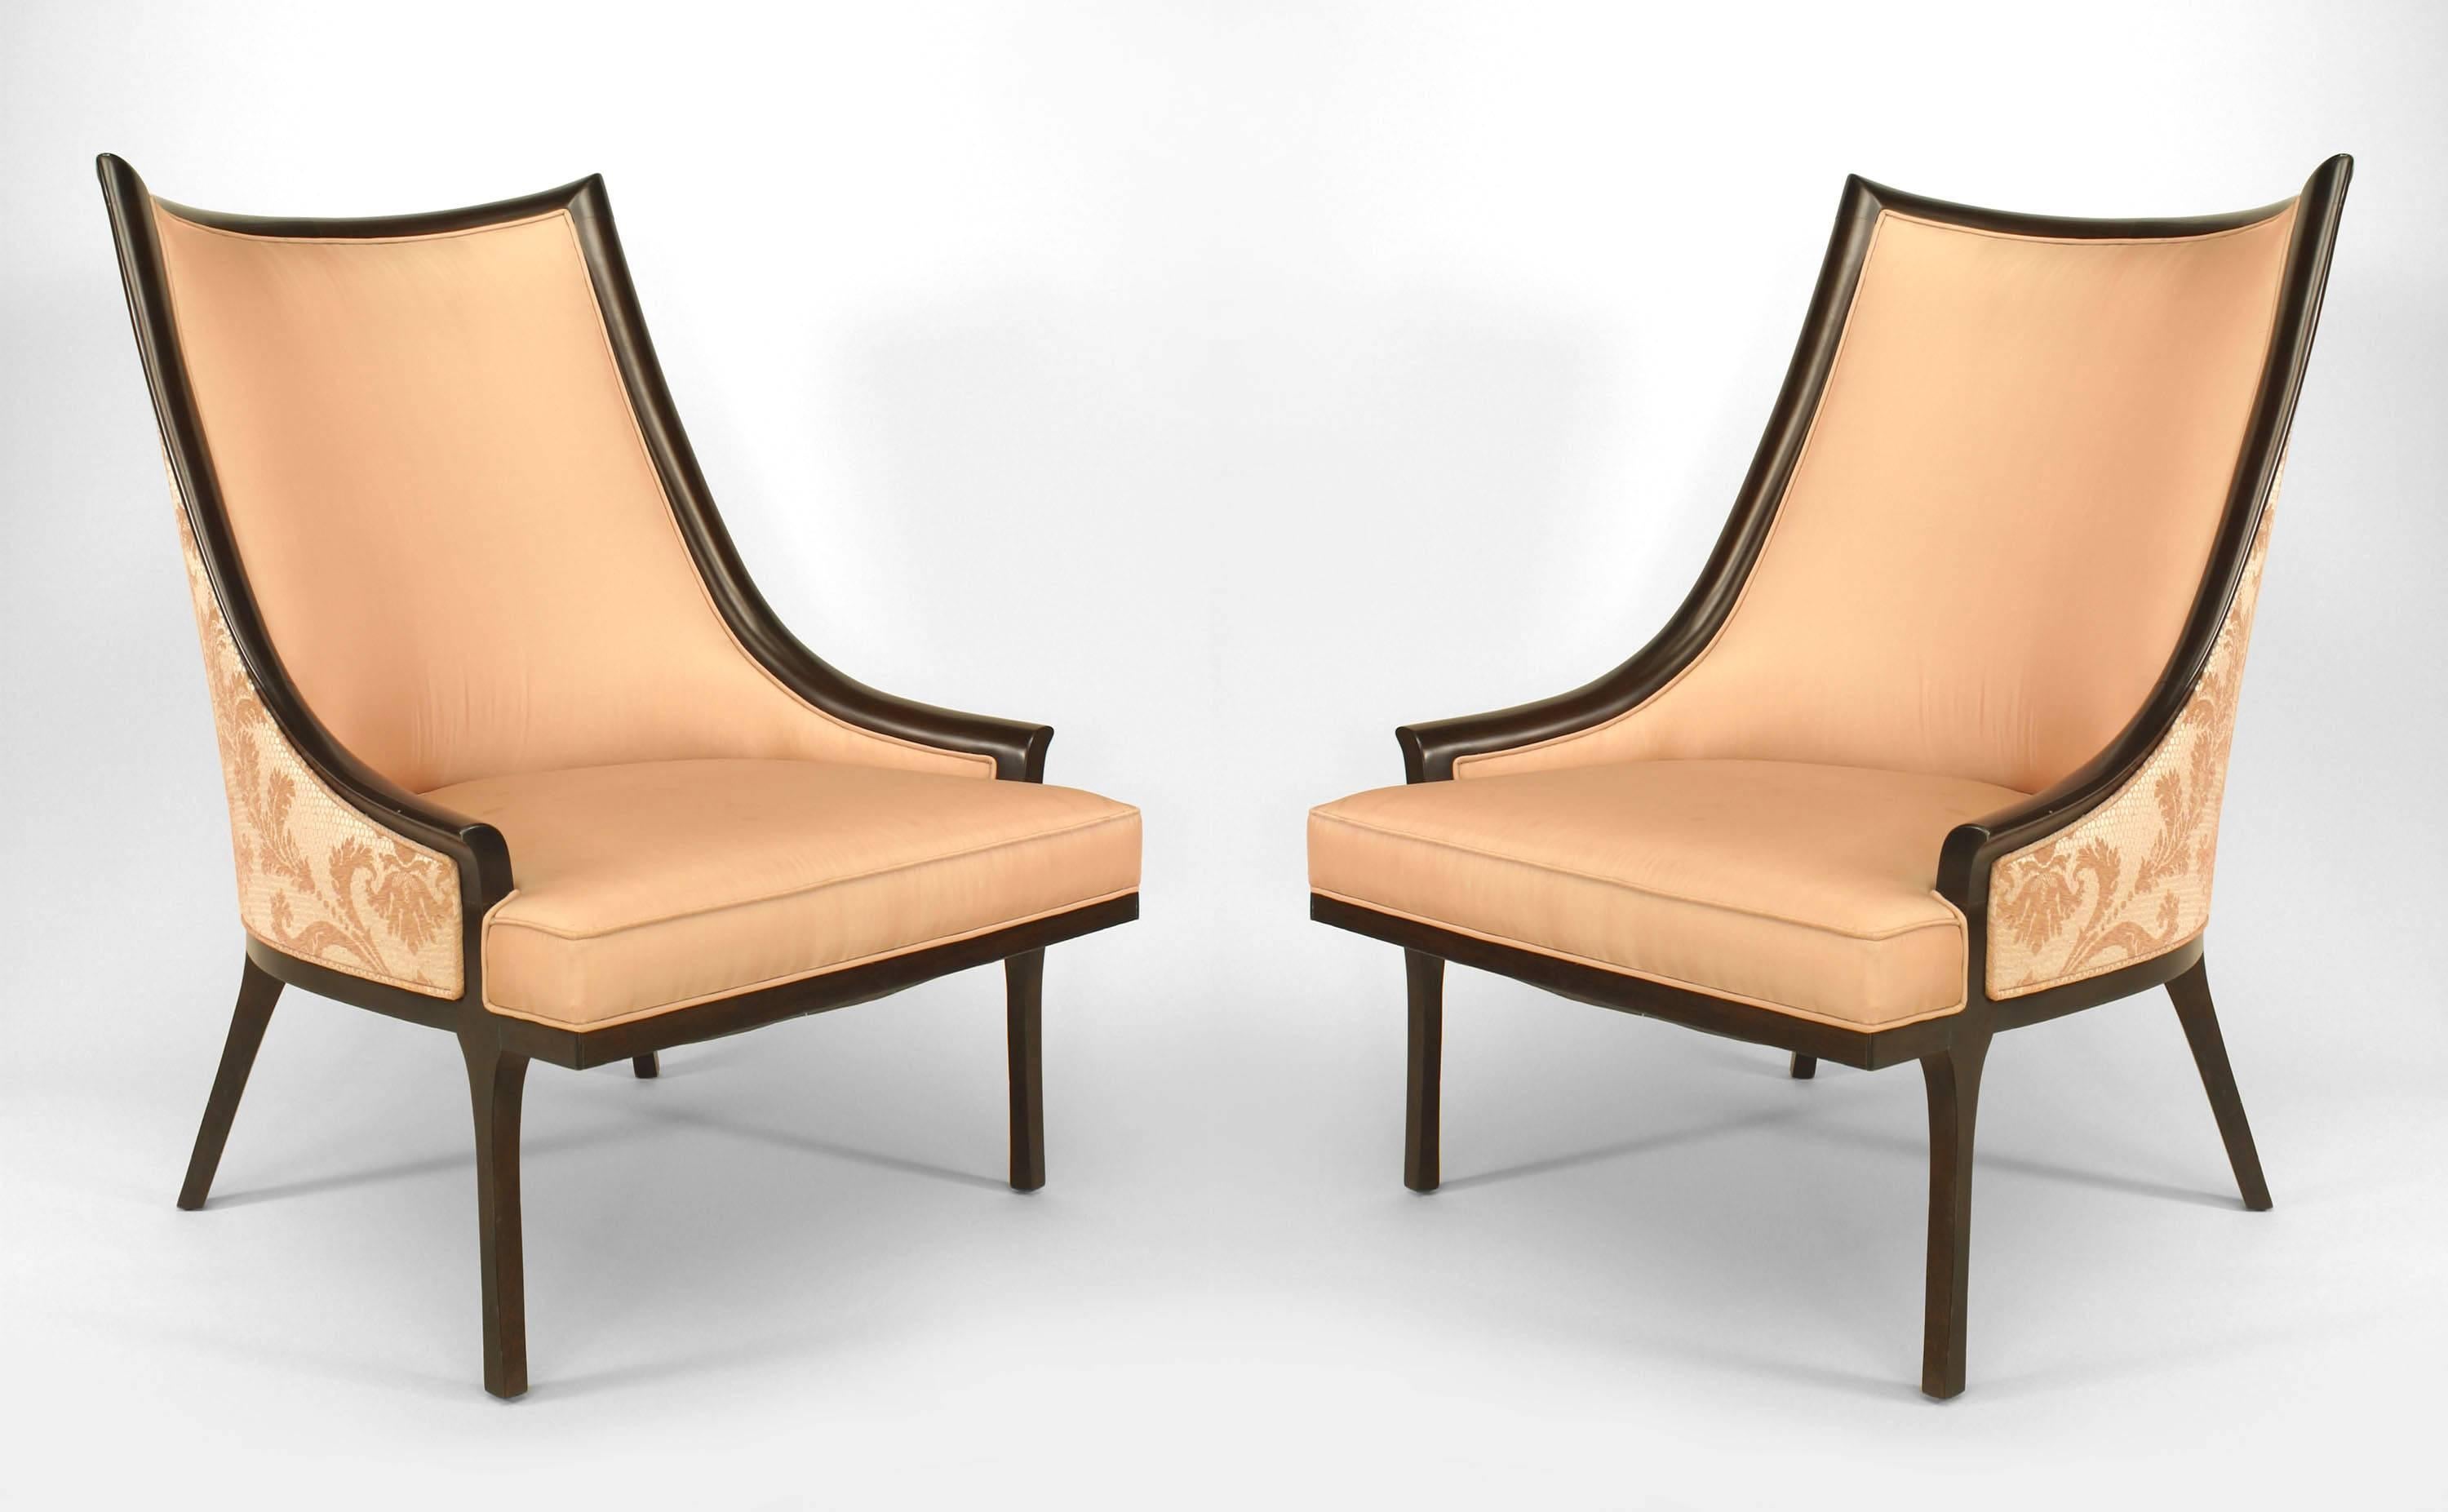 Pair of American 1950s ebonized Armchairs with gondola form sleigh back design
